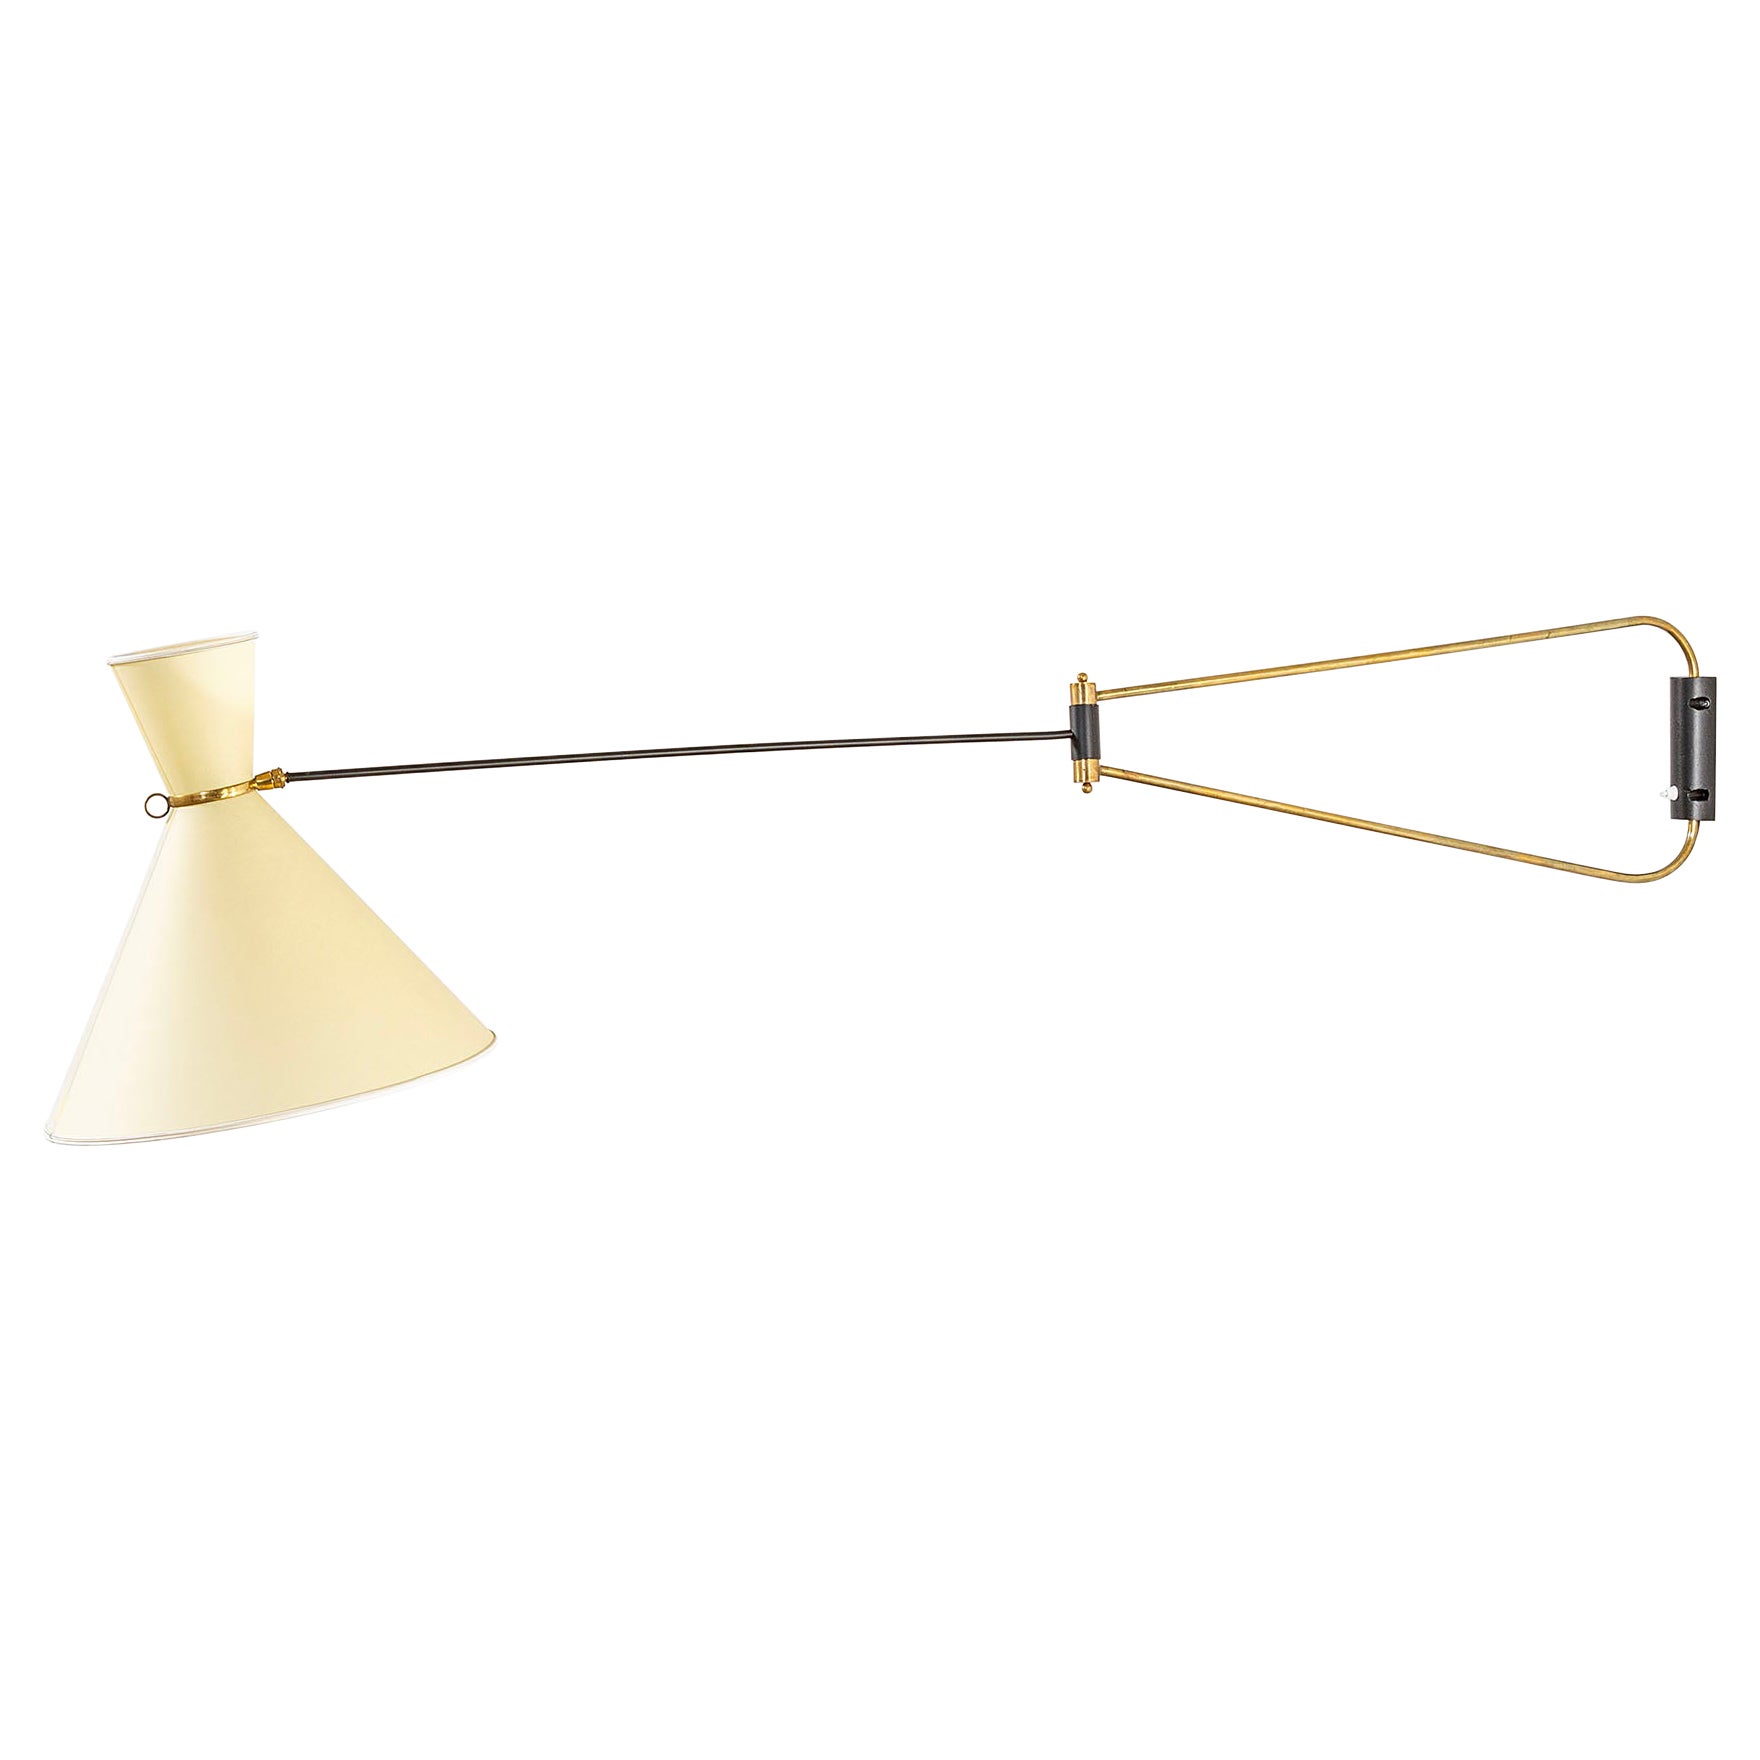 20th Century Robert Mathieu Directionable Wall Lamp in Brass and Fabric, 60s For Sale